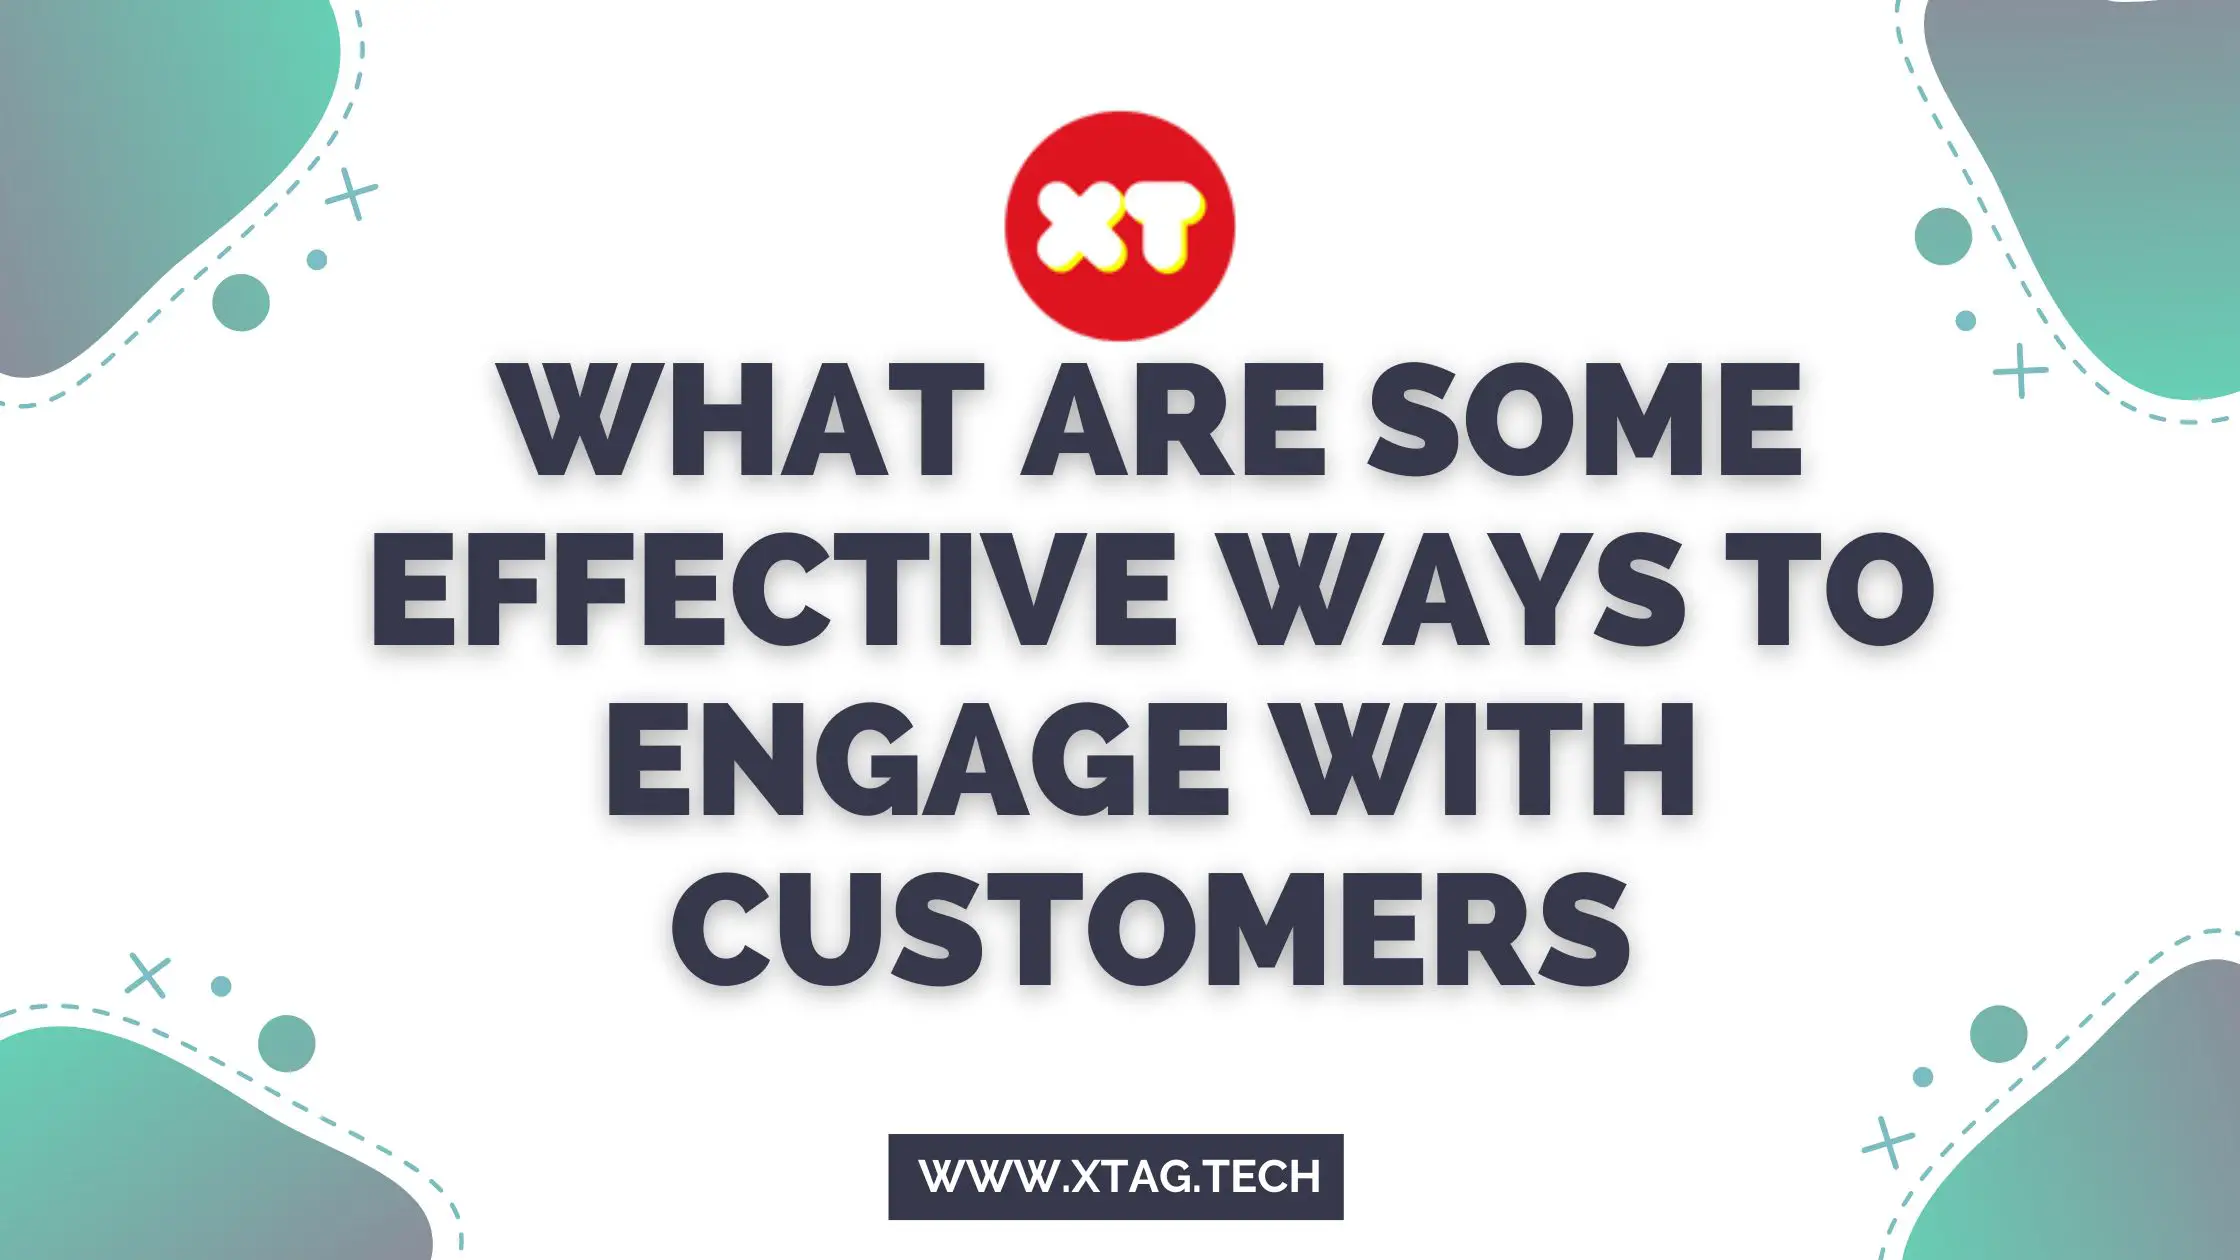 What Are Some Effective Ways To Engage With Customers, Such As Through Reviews And Social Media?